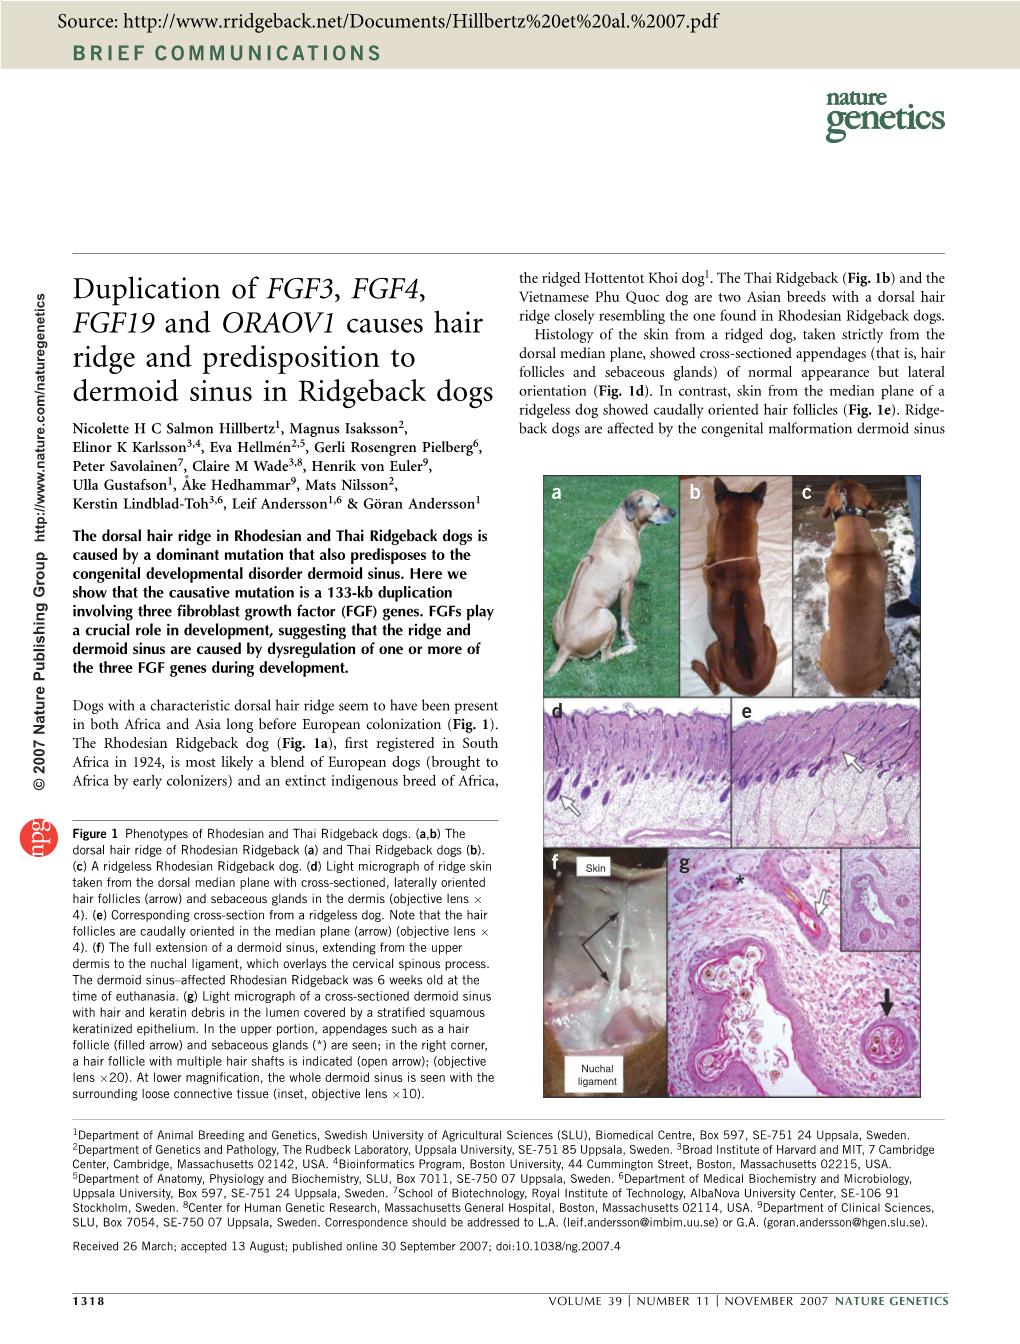 Duplication of FGF3, FGF4, FGF19 and ORAOV1 Causes Hair Ridge and Predisposition to Dermoid Sinus in Ridgeback Dogs